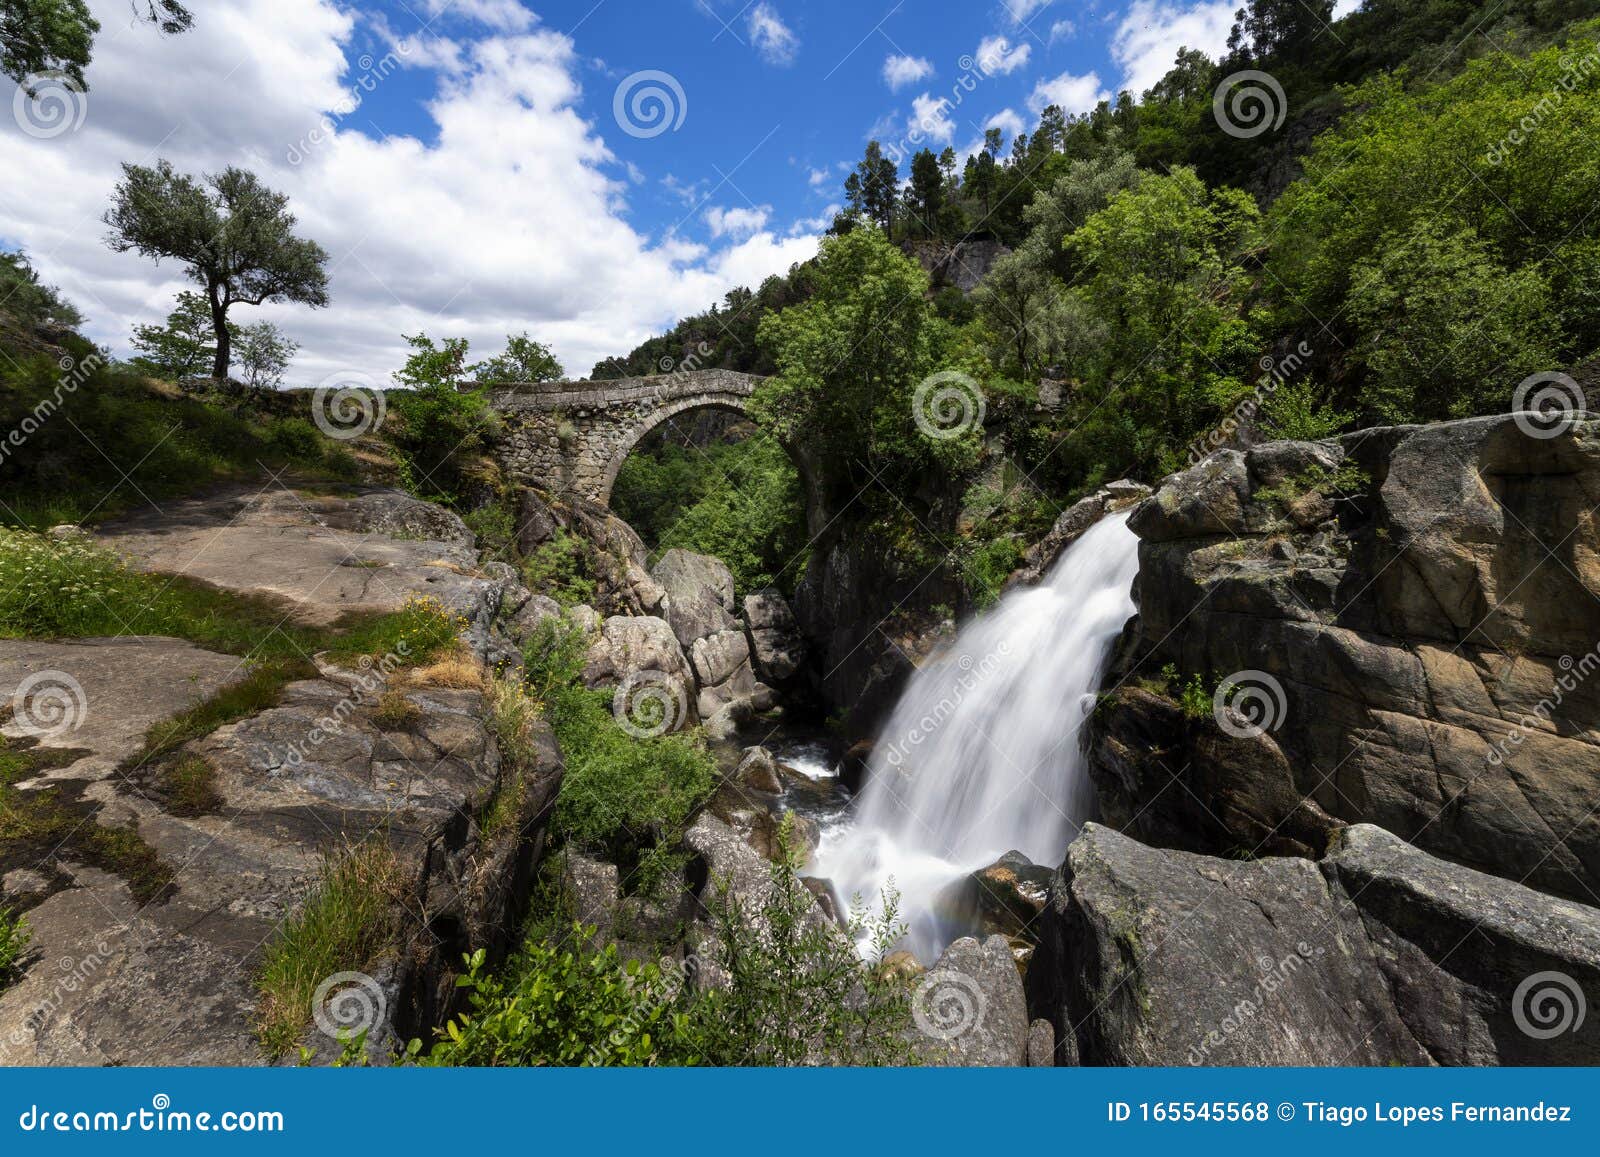 view of the mizarela bridge with a waterfall at the peneda geres national park